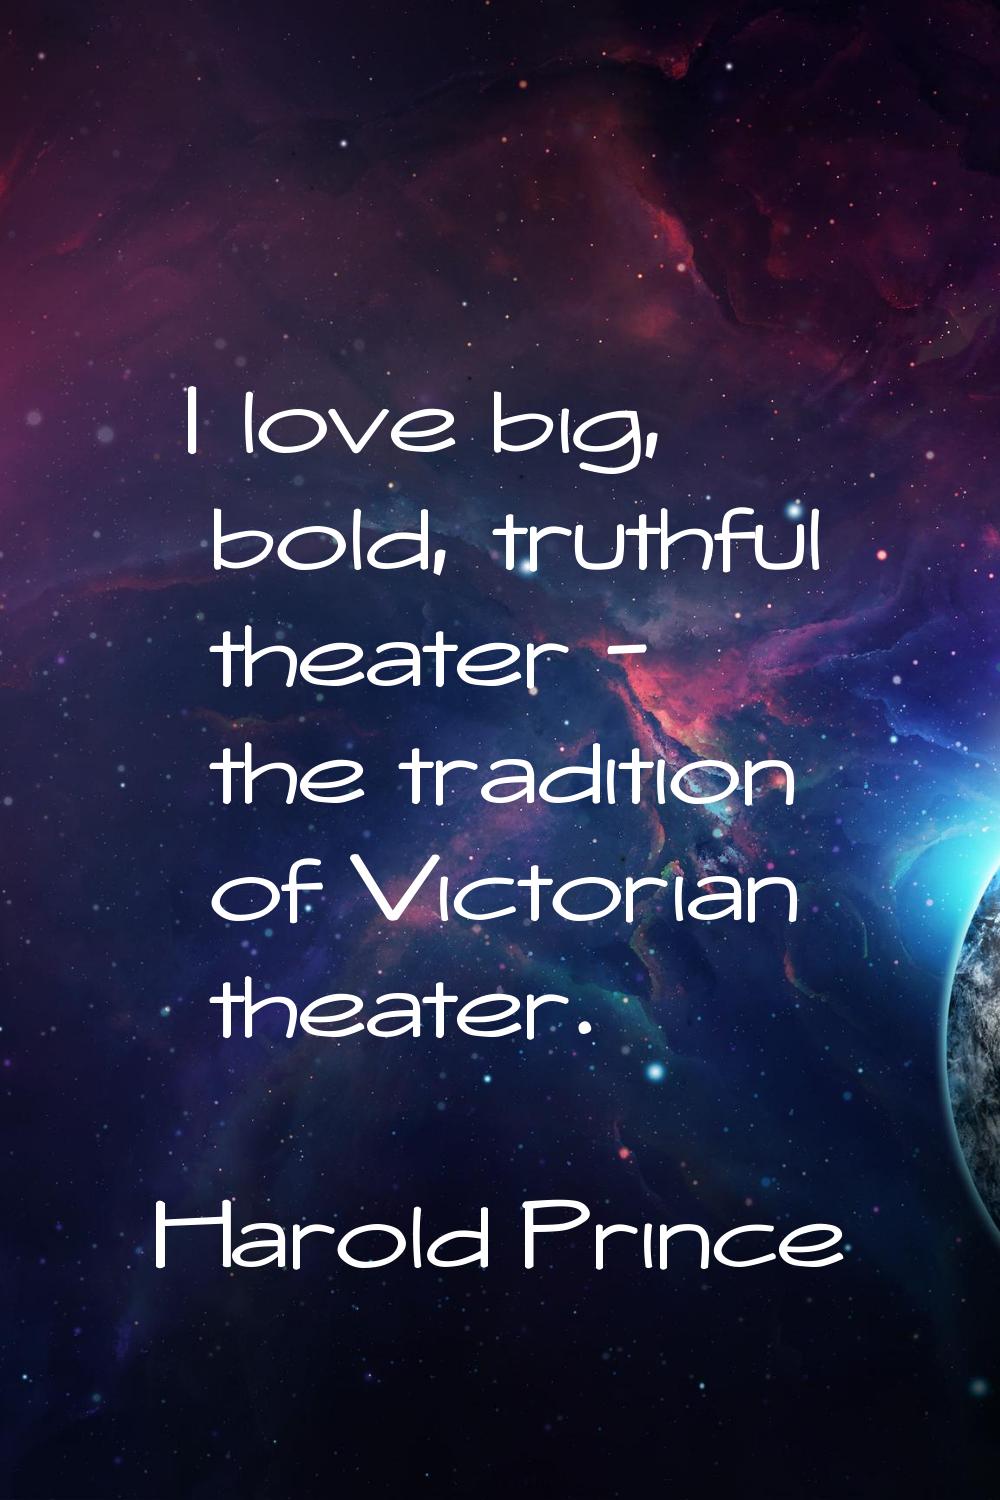 I love big, bold, truthful theater - the tradition of Victorian theater.